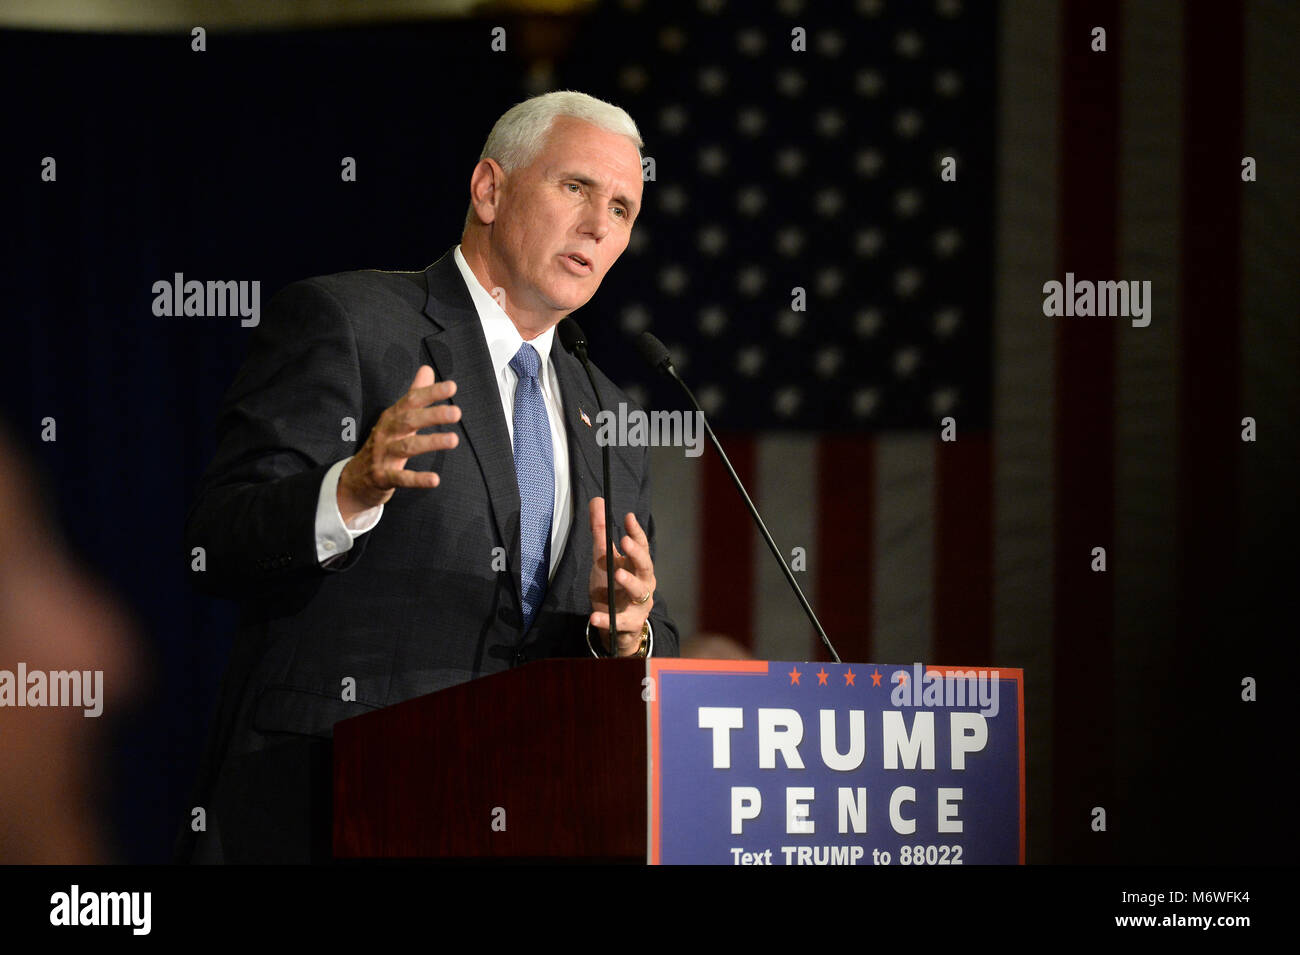 Chesterfield, MO, USA – September 06, 2016: Republican vice presidential candidate, Indiana Governor Mike Pence speaks to supporters at a rally in Che Stock Photo